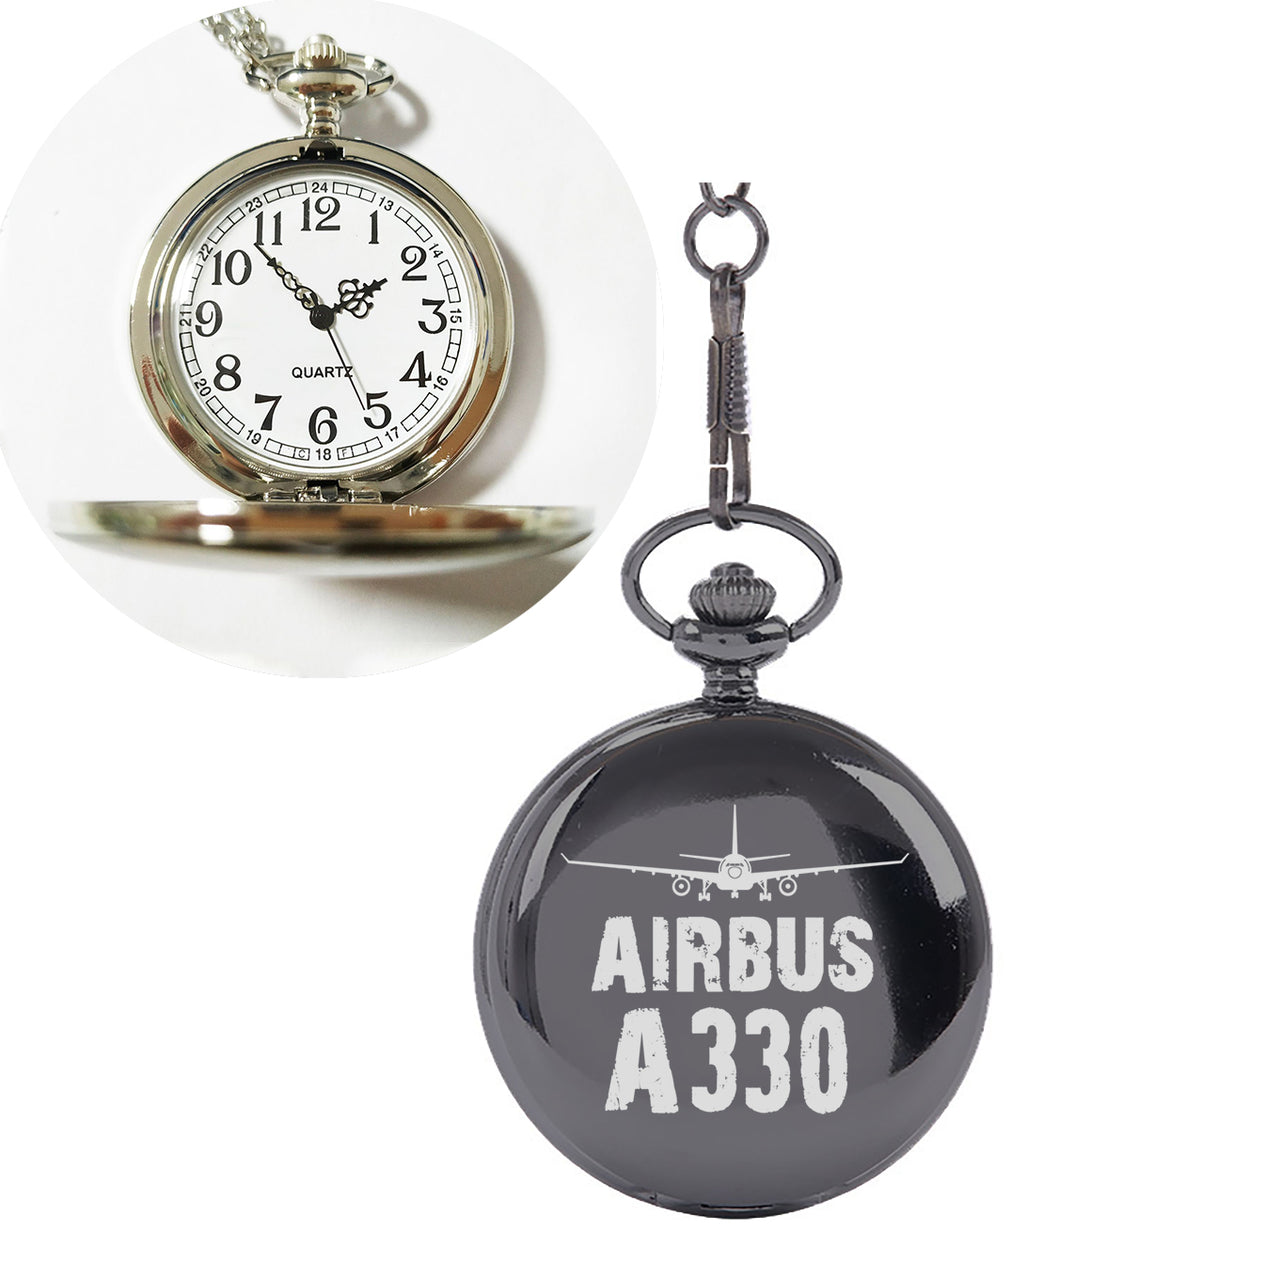 Airbus A330 & Plane Designed Pocket Watches